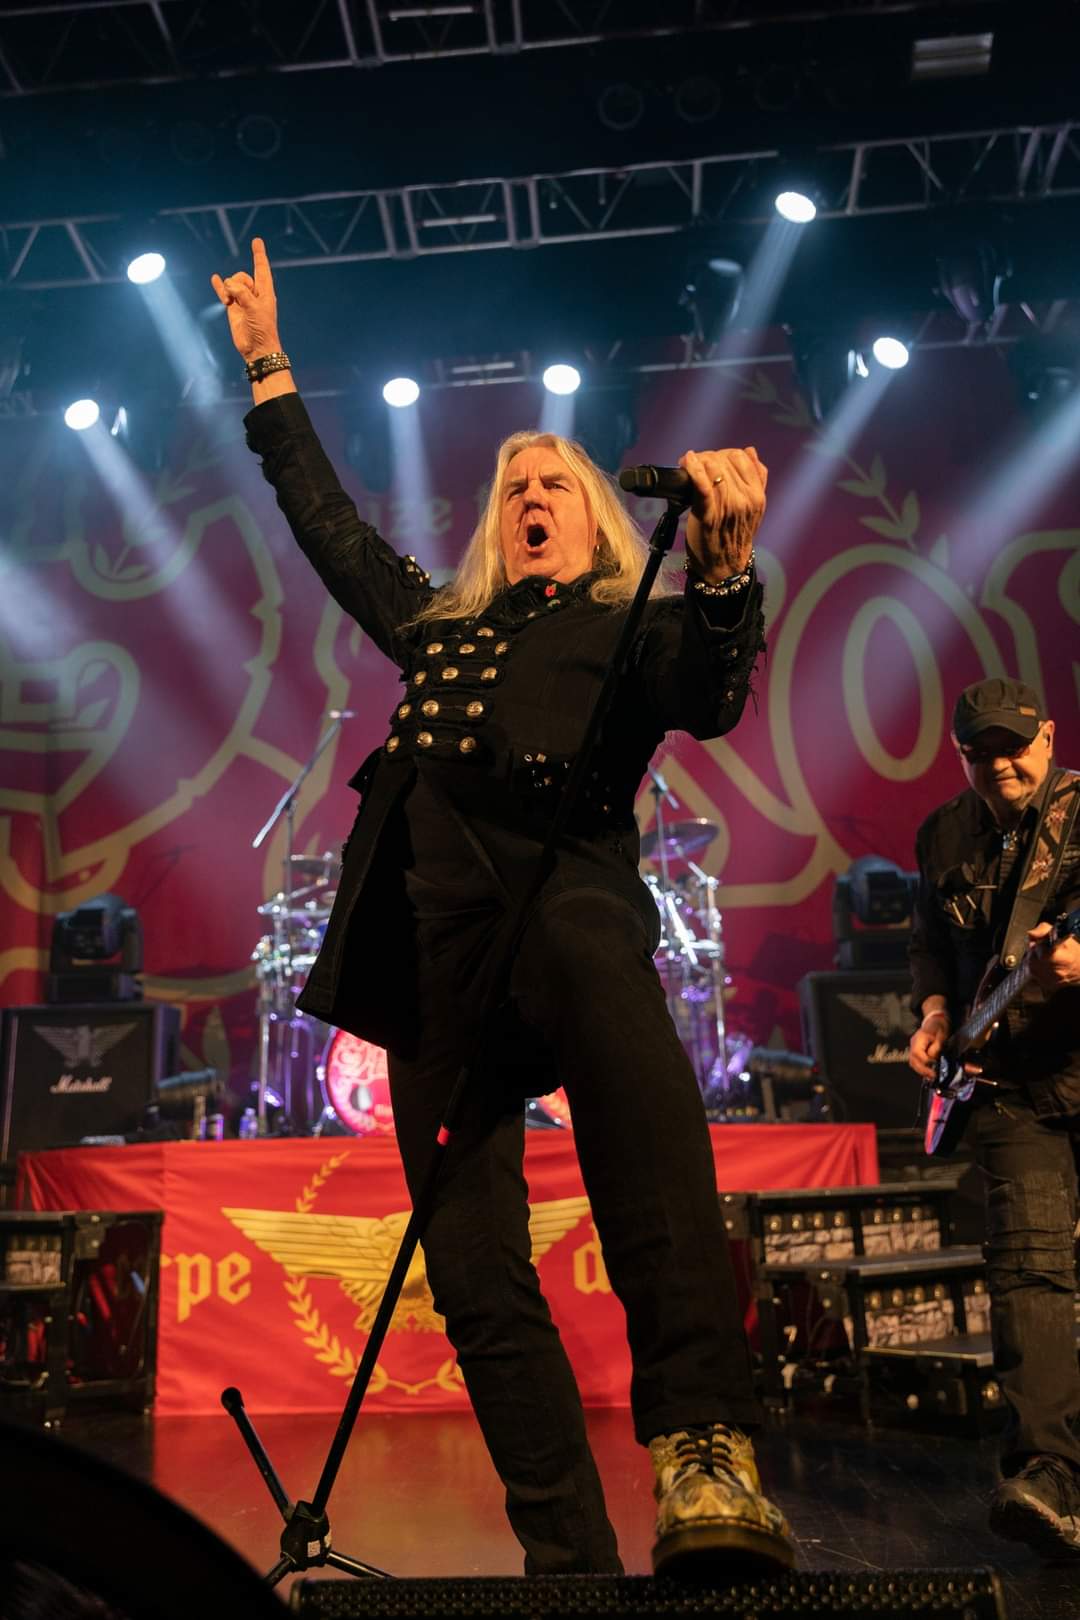 Happy birthday Lord Biff Byford!
thanks for all your good music!
Never surrender!!       